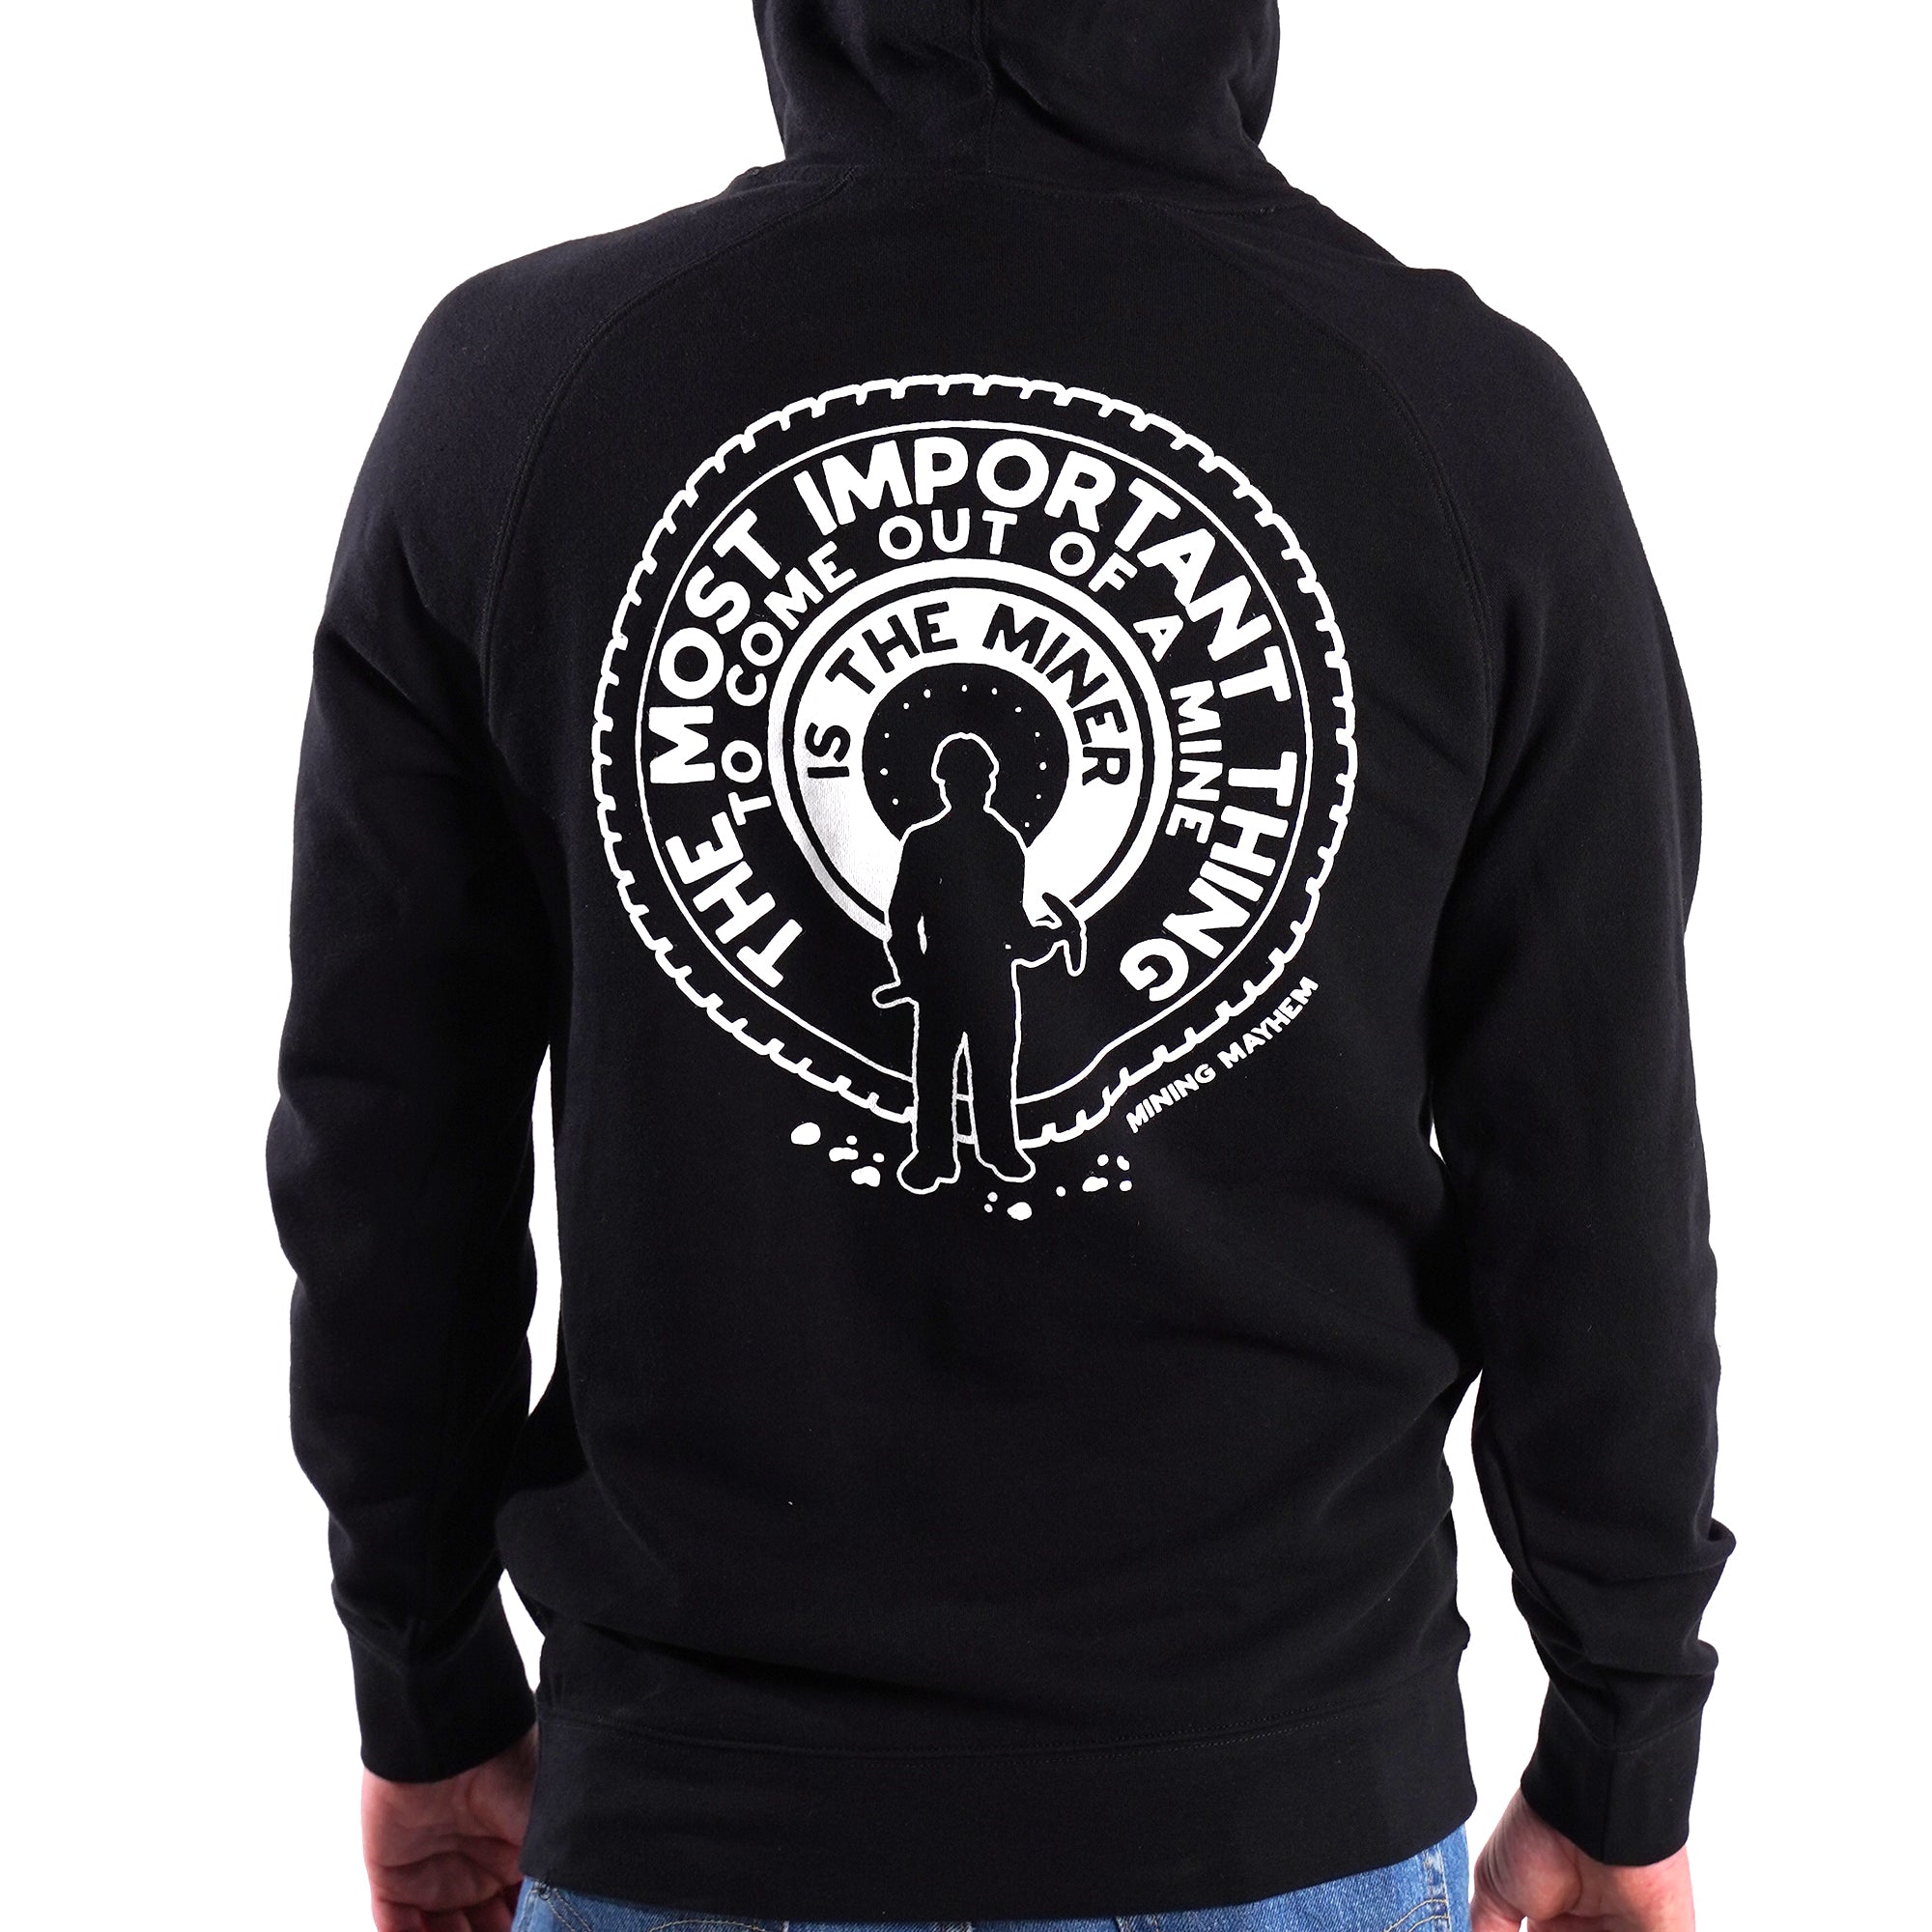 The Most Important Thing To Come Out Of A Mine - Hoodies (Black)